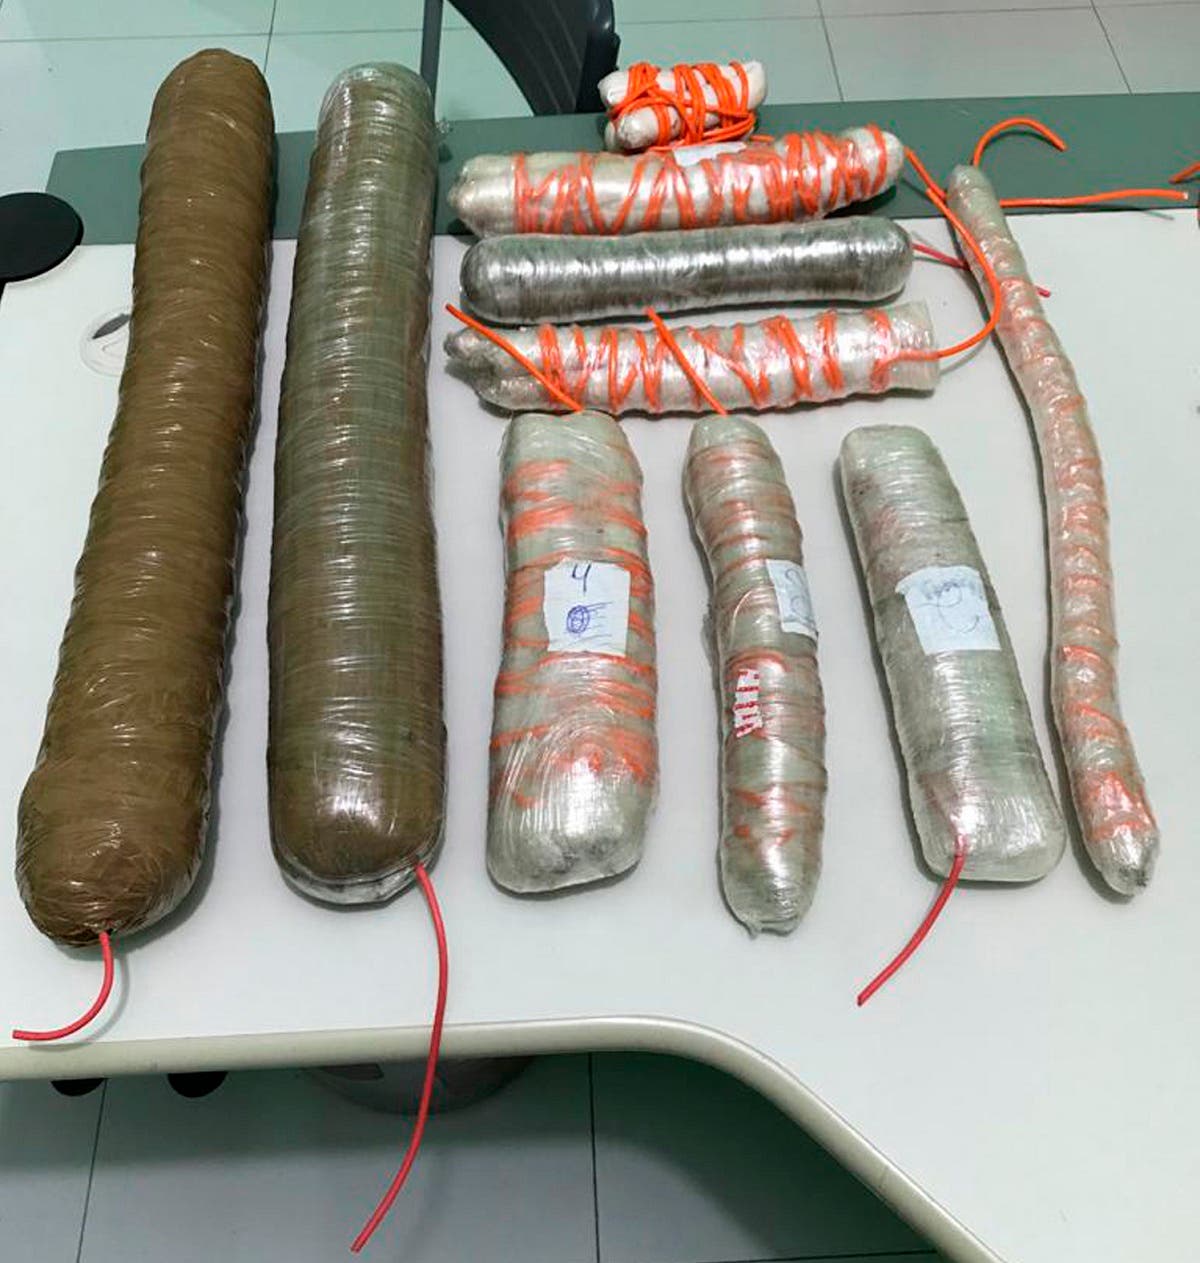 This handout photo released by the Civil Police of Ceara shows explosives seized by the police after a shootout with bank robbers, in Milagres, in Brazil's state of Ceara, Friday, Dec. 7, 2018. (AP)